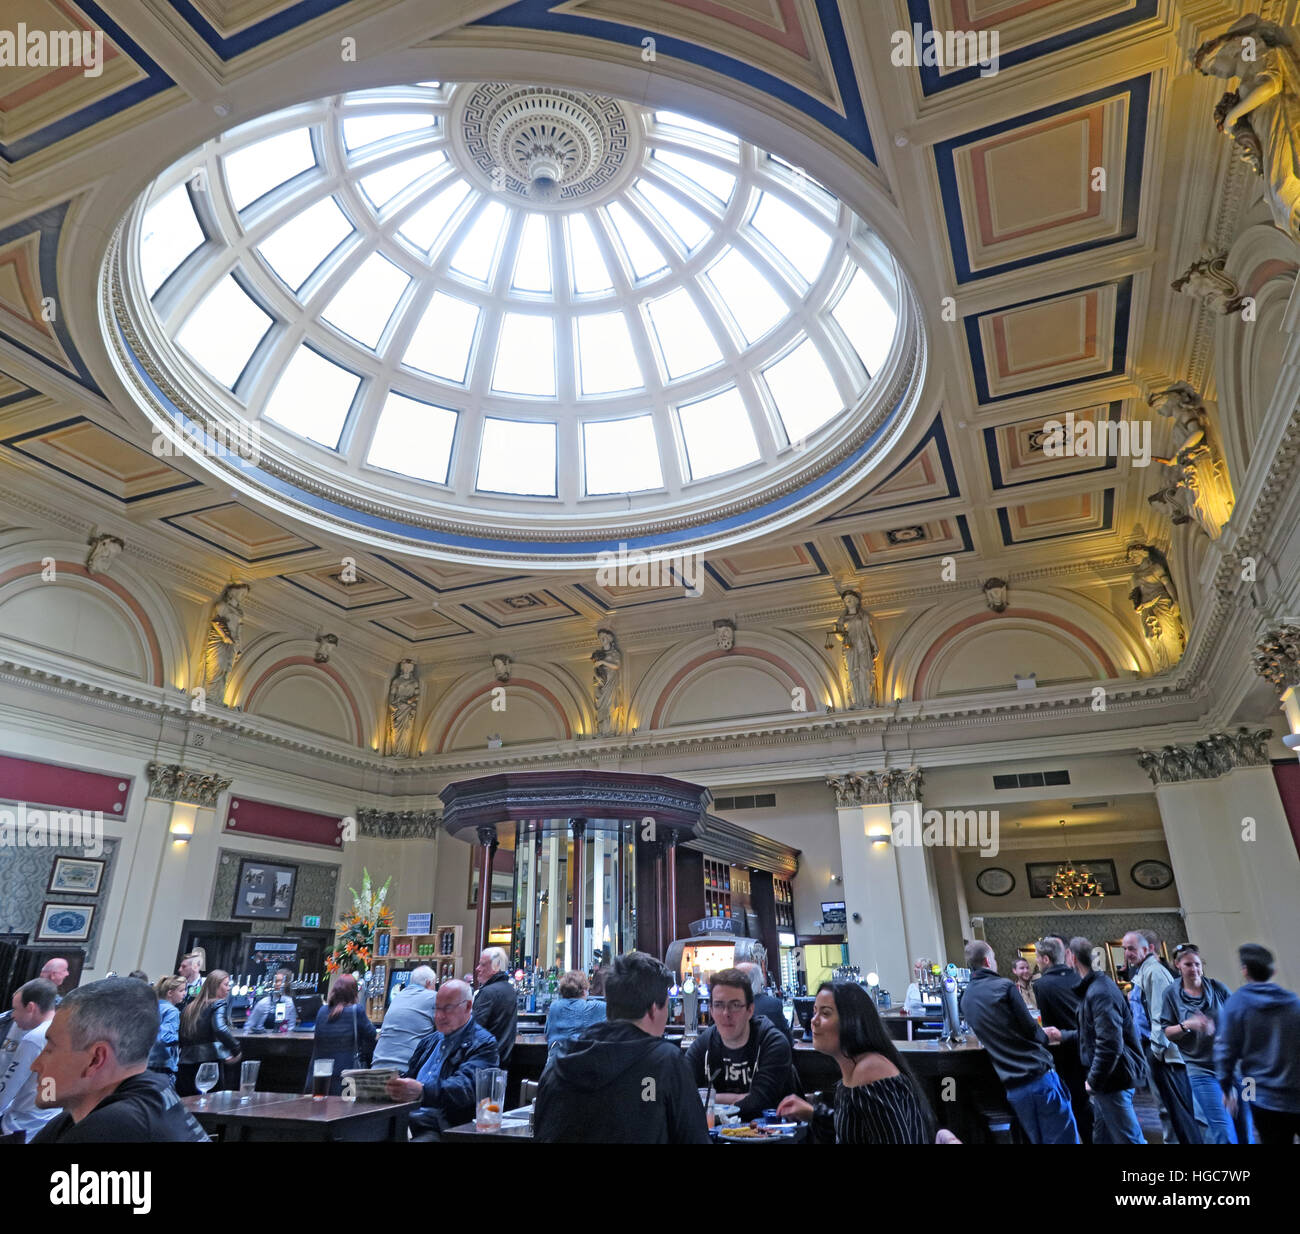 An old grand Victorian bank building - The Counting House Wetherspoon Pub, 2 St Vincent Place, Glasgow, Scotland, UK, G1 2DH Stock Photo